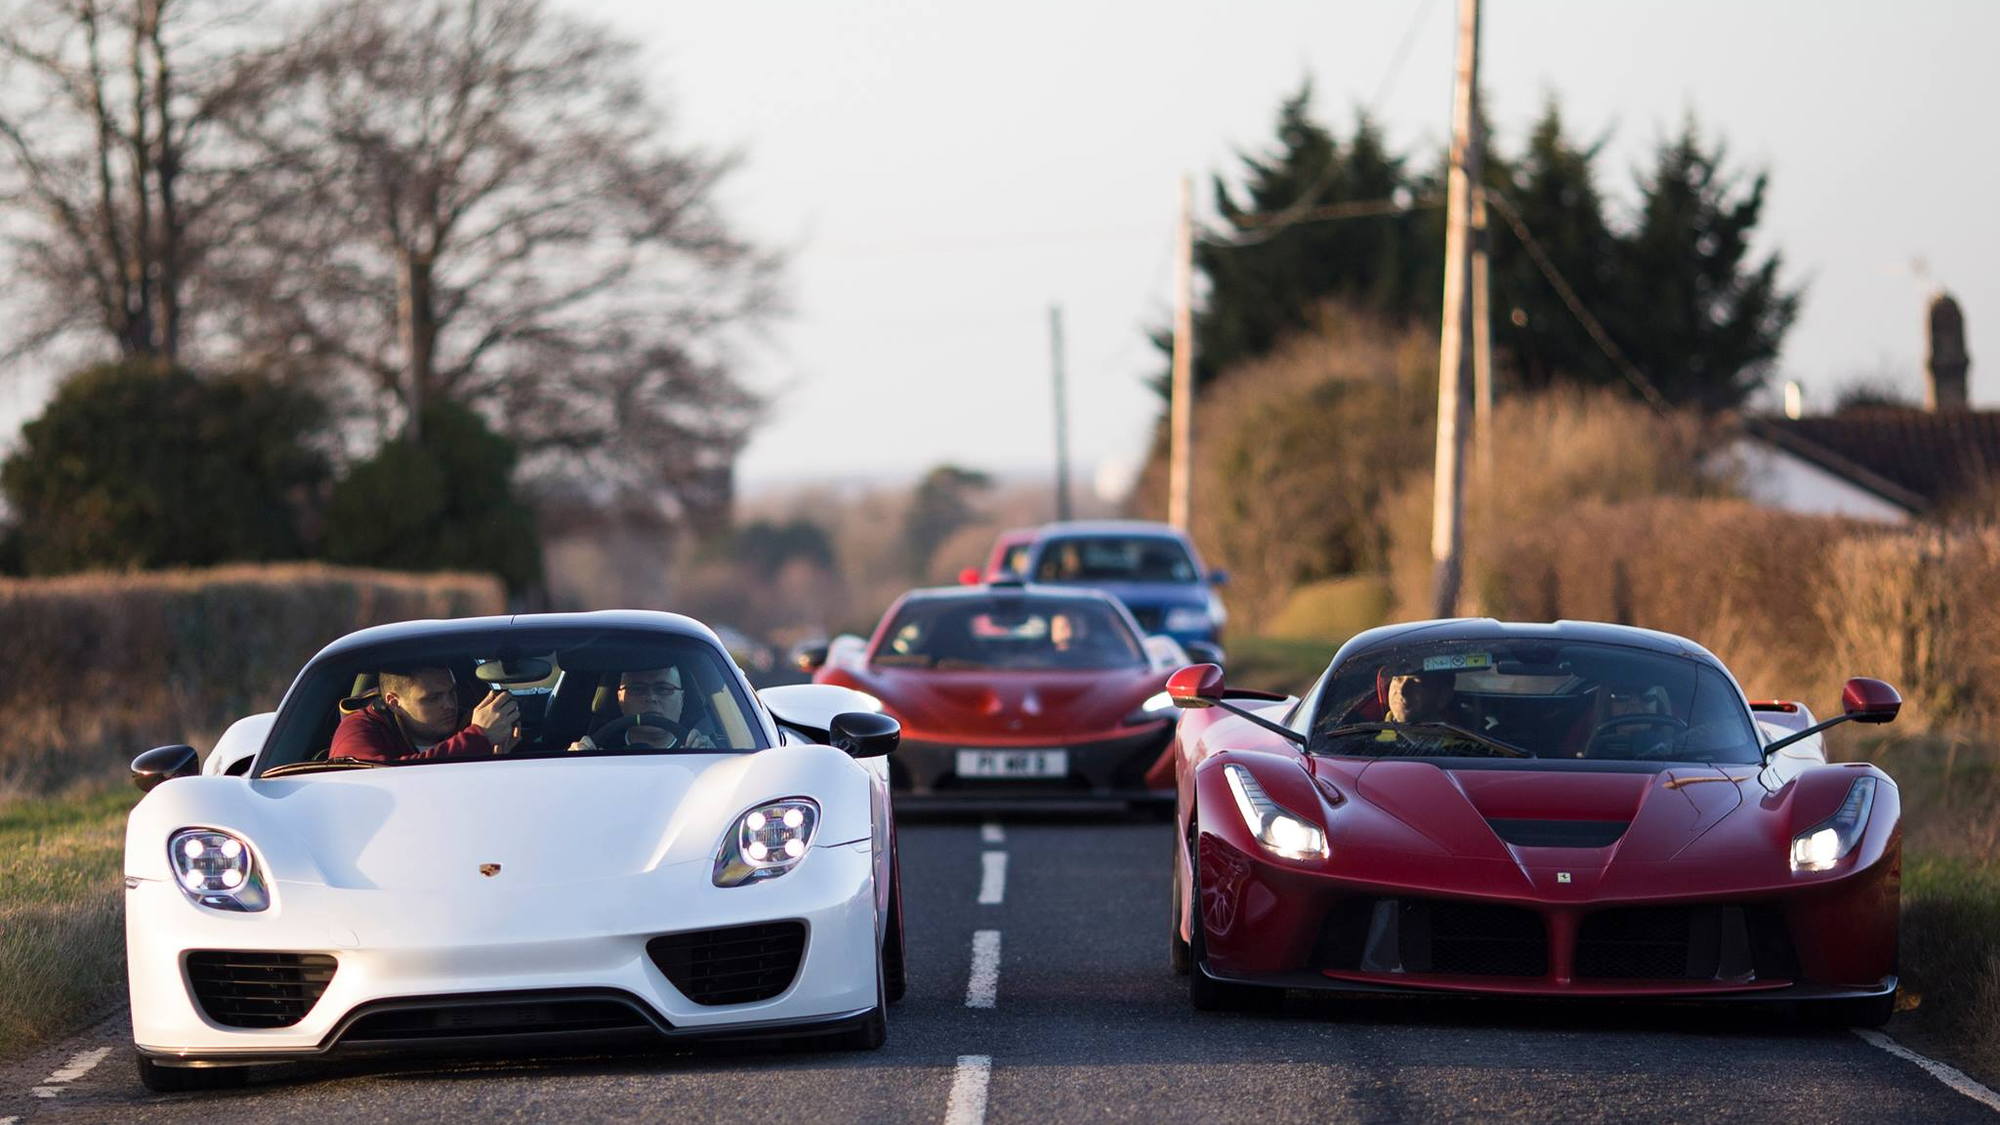 Paul Bailey owns all three of the world's top hypercars - Image via SupercarDriver